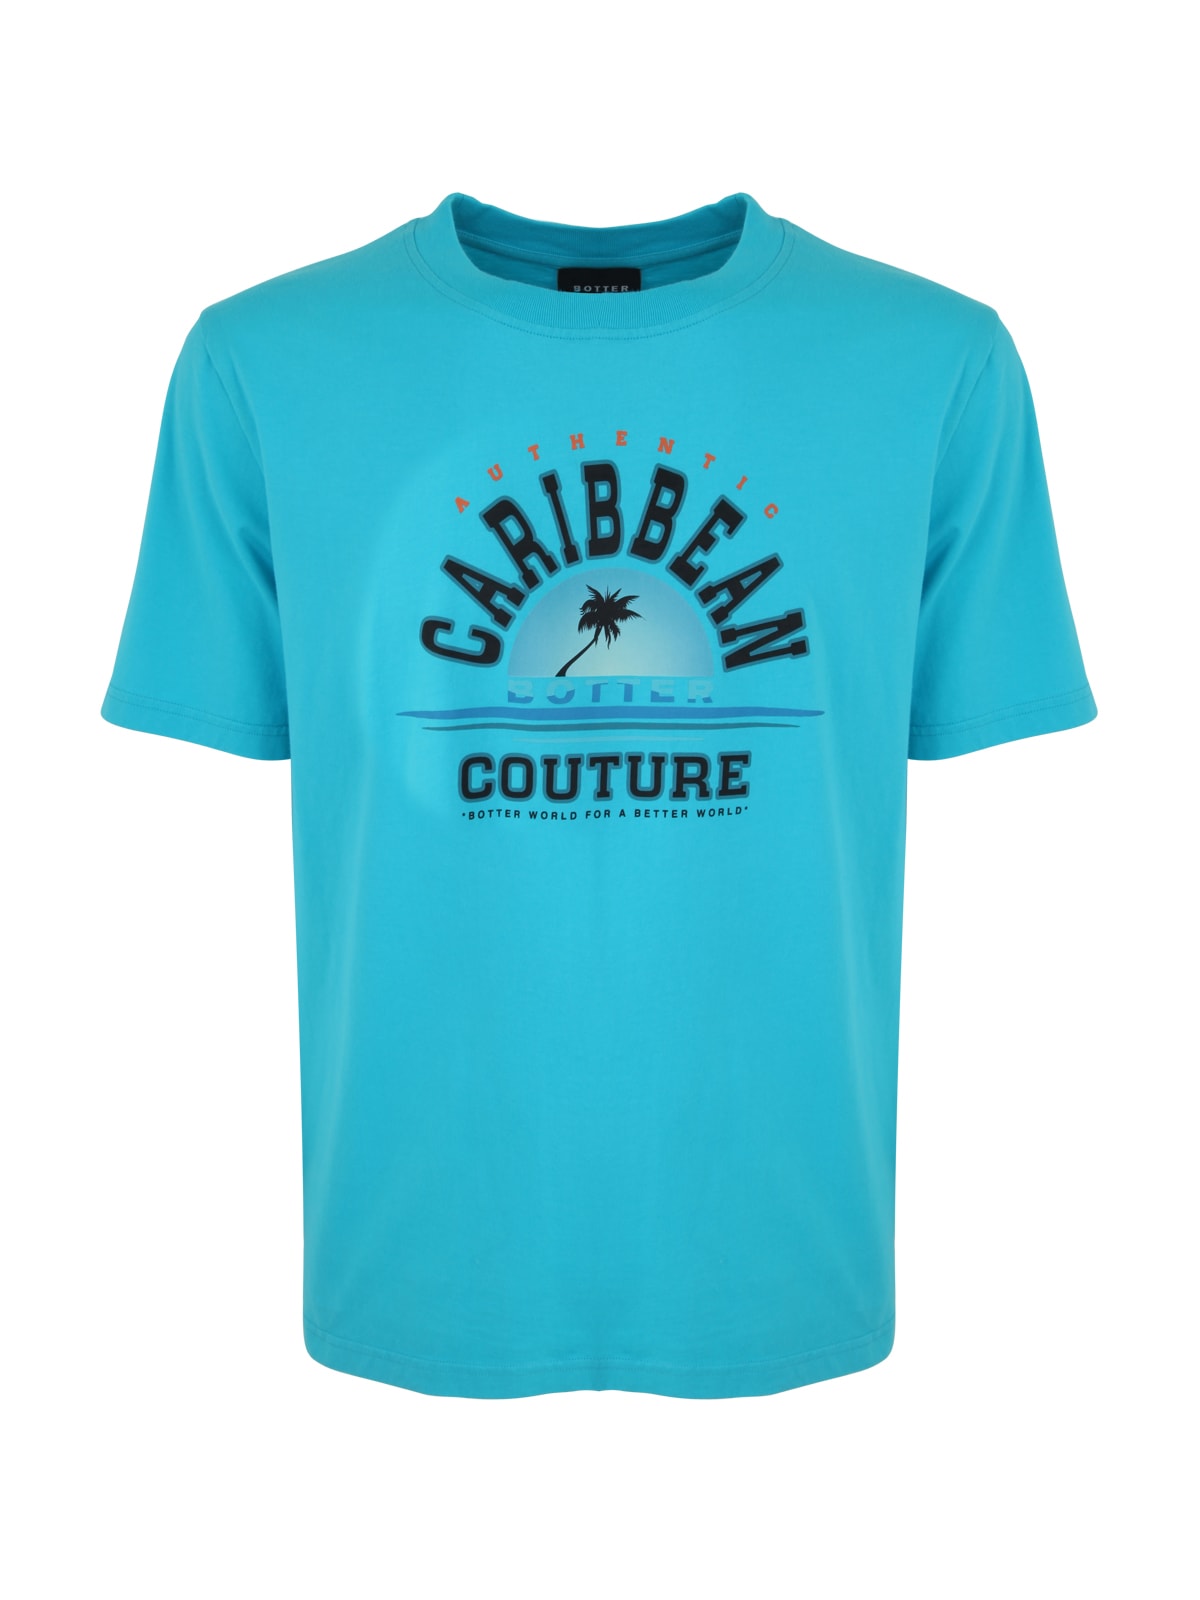 BOTTER CLASSIC CARIBBEAN COUTURE T-SHIRT